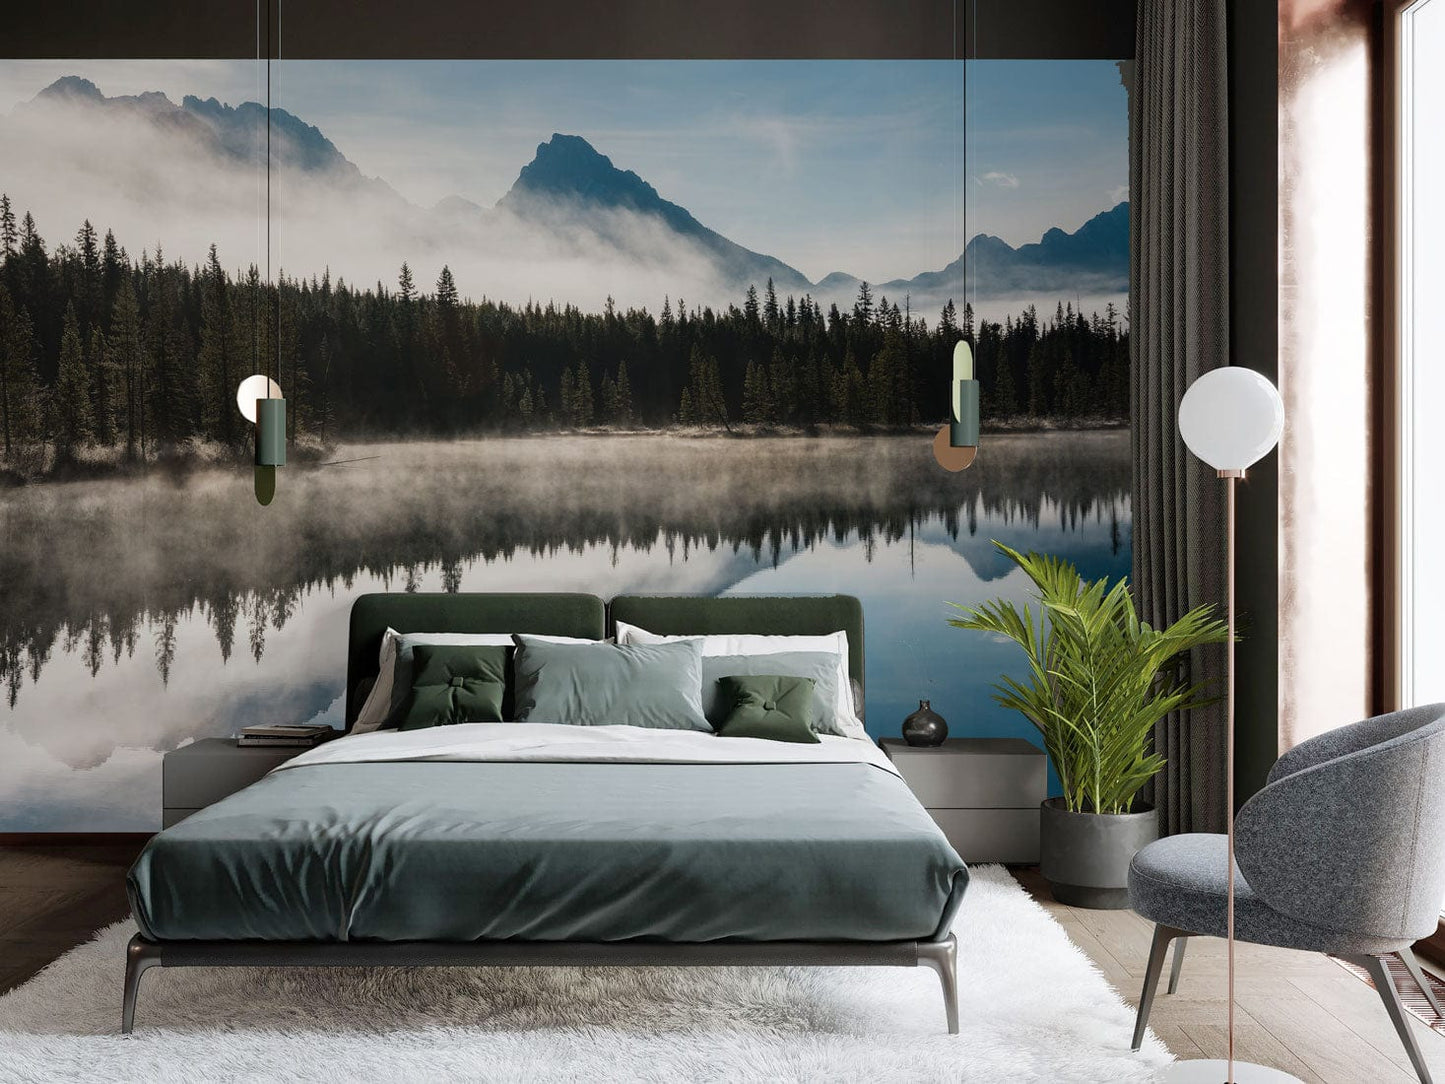 Mountains and Faraway Landscapes Printed on Wallpaper Mural for the Bedroom's Decoration